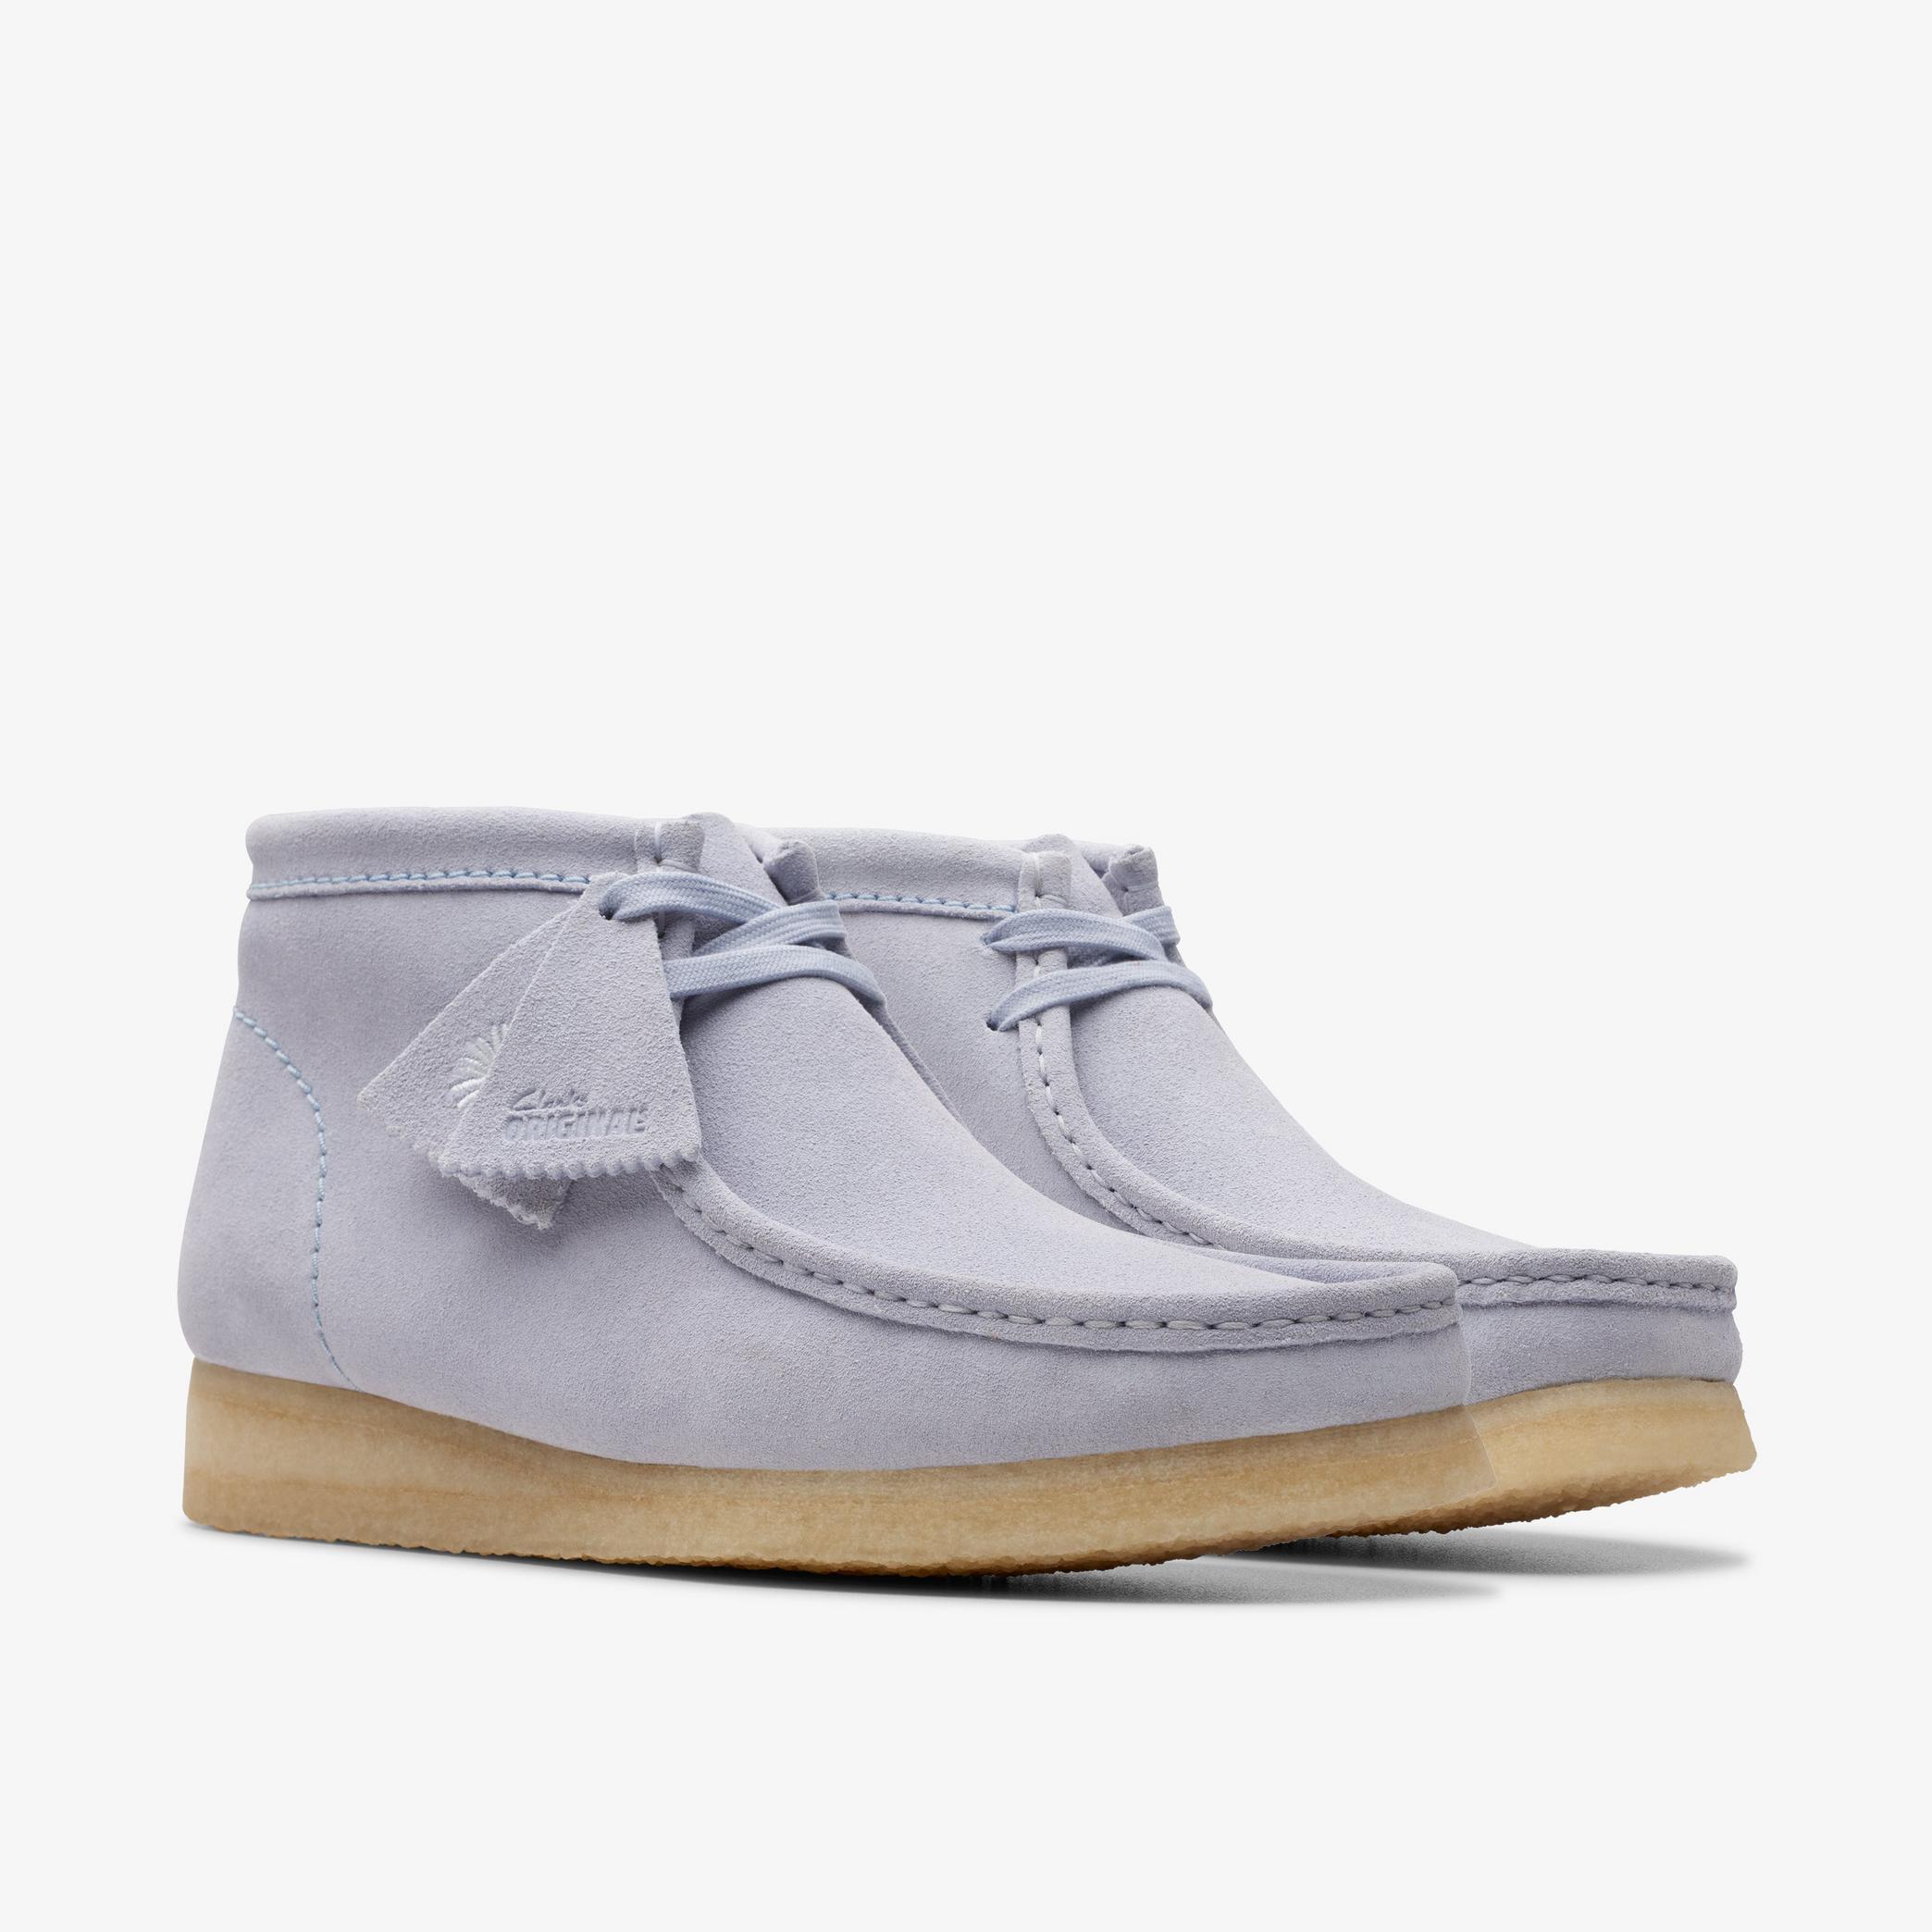 Wallabee Boot Cloud Grey Suede Wallabee, view 4 of 7